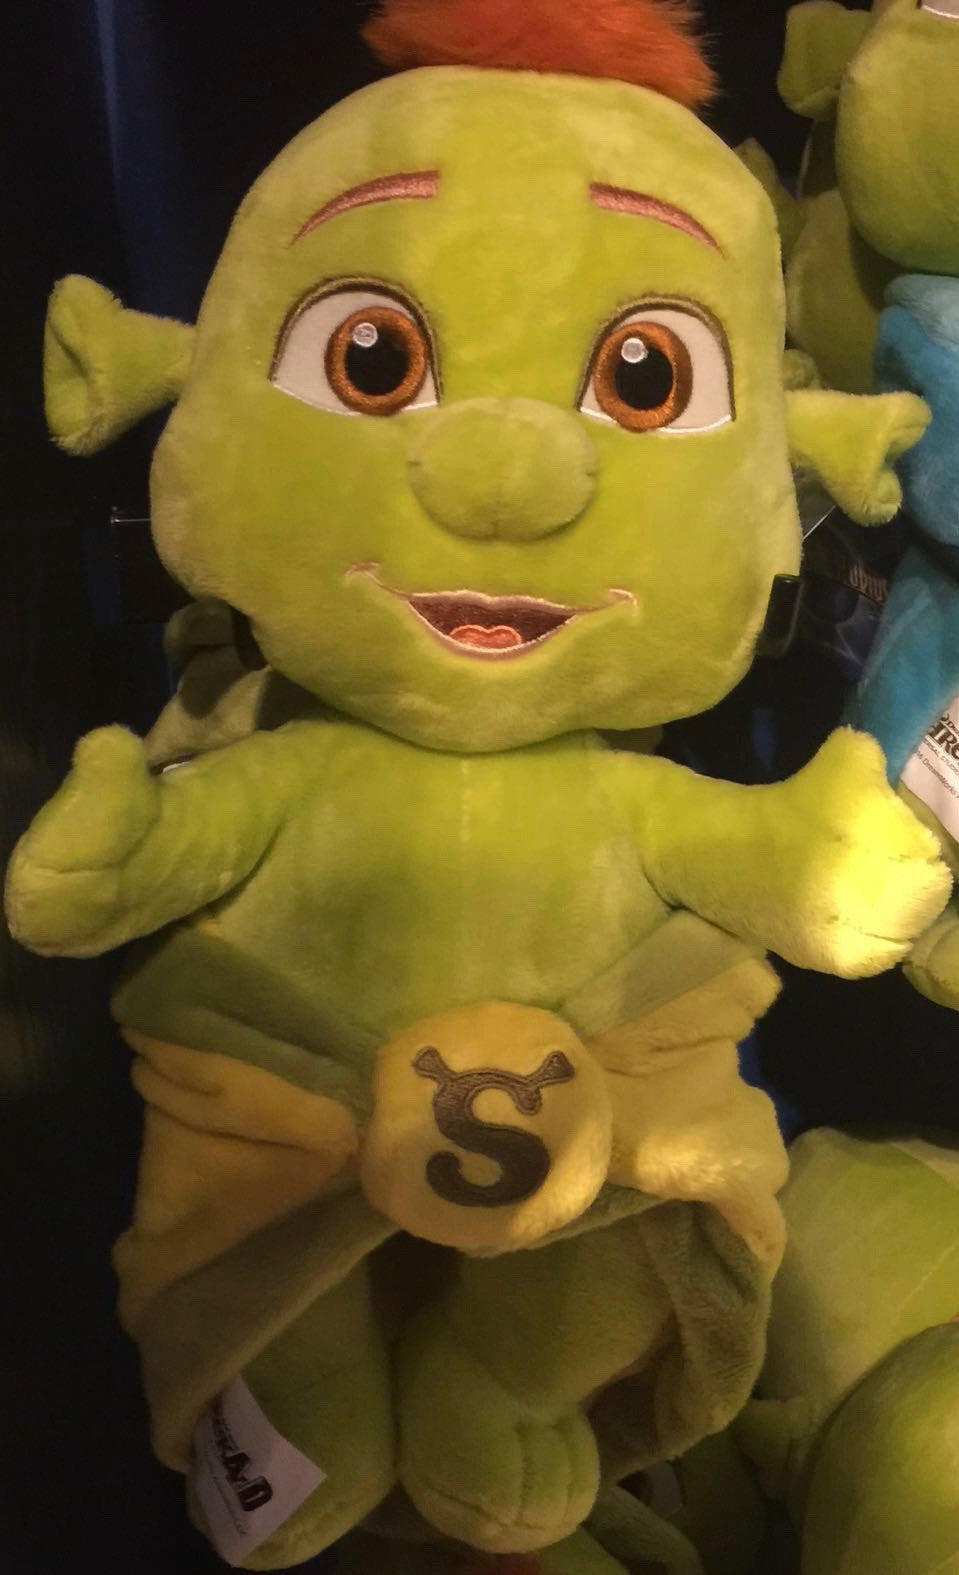 Universal Studios Shrek 4-D Baby Boy in Yellow Blanket Plush New With Tags